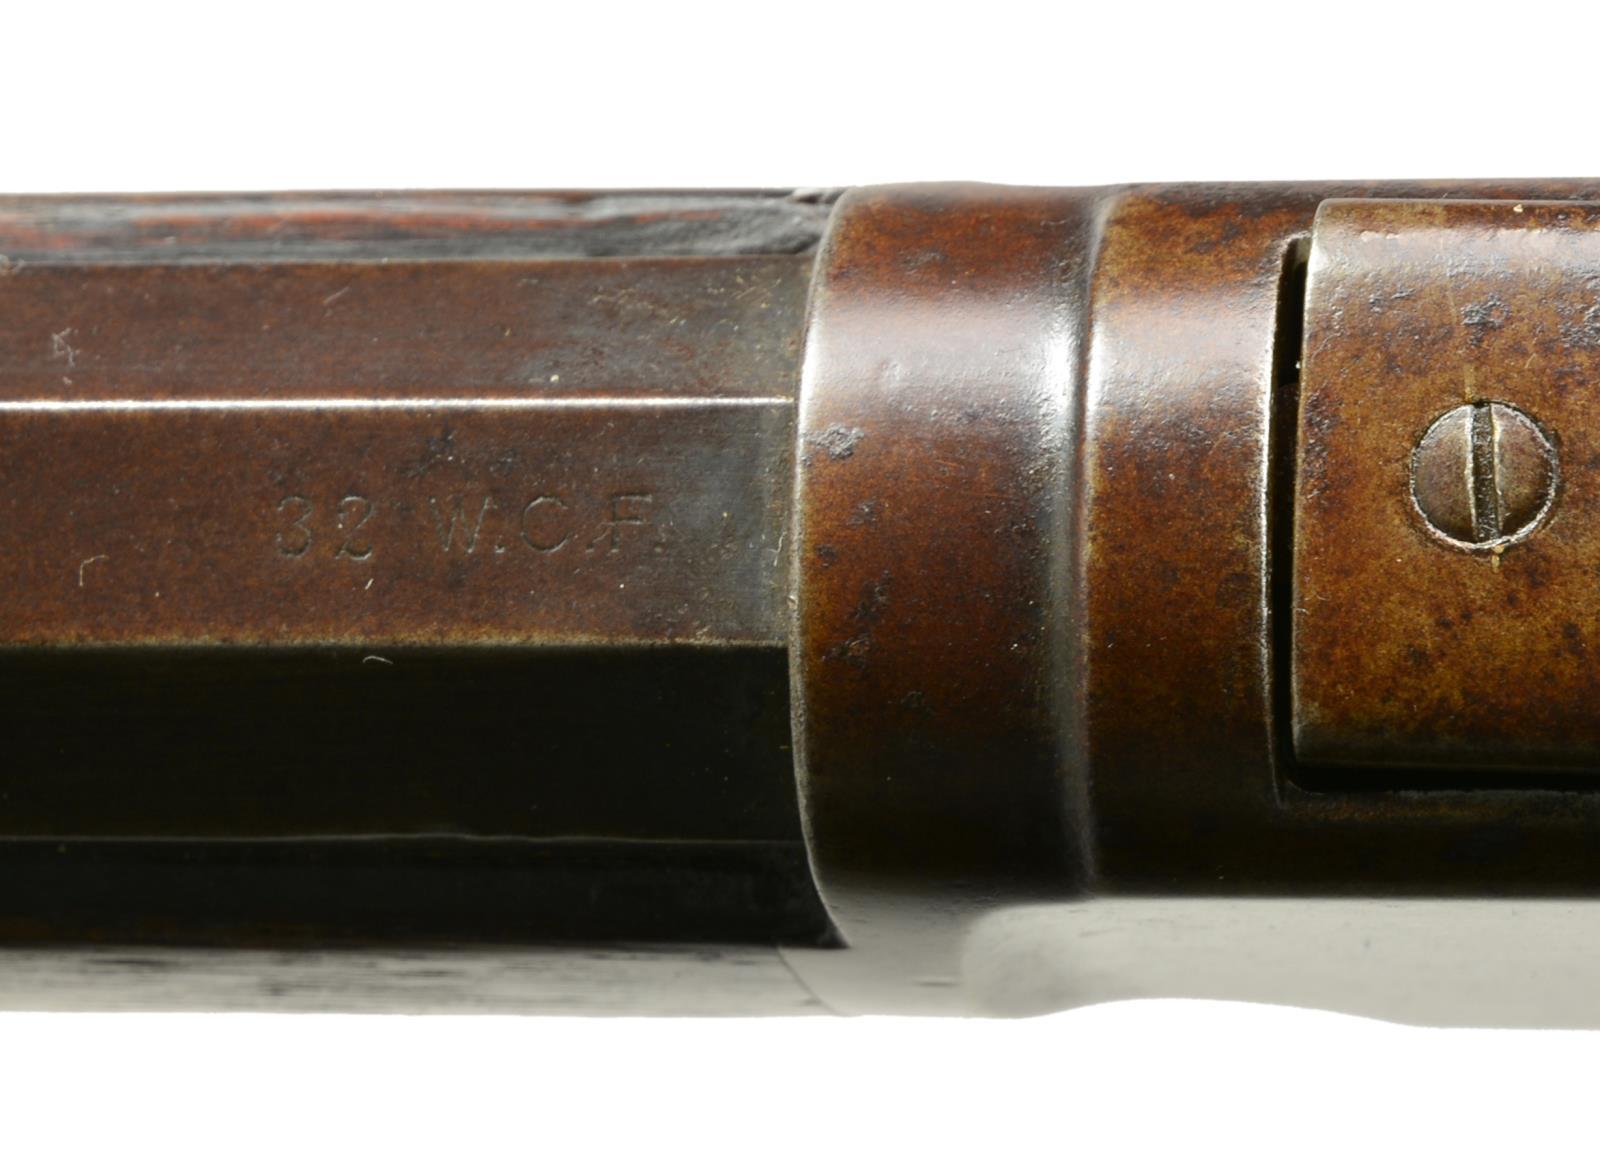 SPECIAL ORDER WINCHESTER 1873 RIFLE.